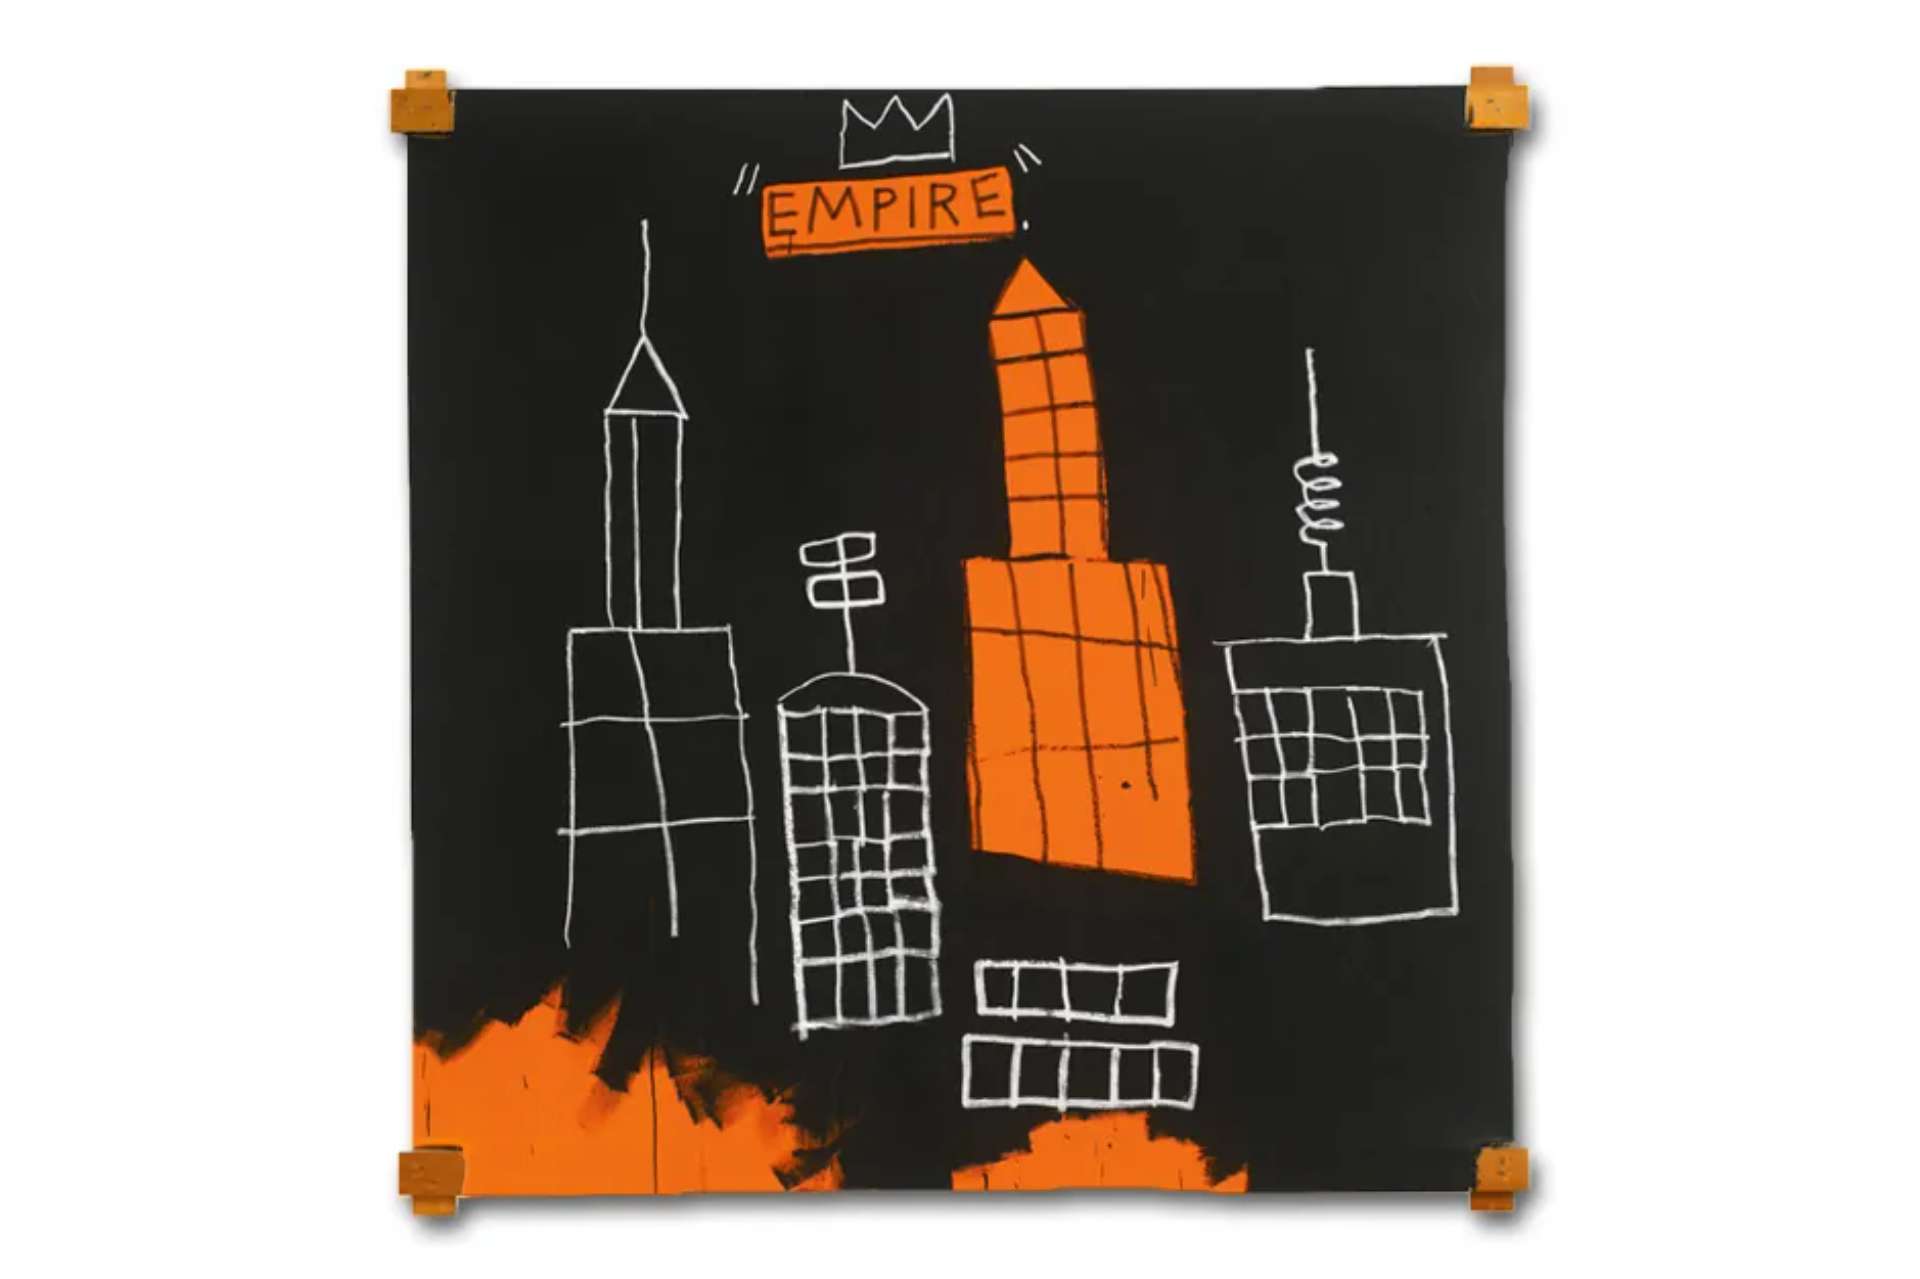 Jean-Michel Basquiat’s Mecca. A Neo-Expressionist painting depicting the artist’s version of The Empire State Building. One building that is orange, the others sketched in white against a black background. The text “empire” reads in the top centre of the painting with an outline of a crown above it.